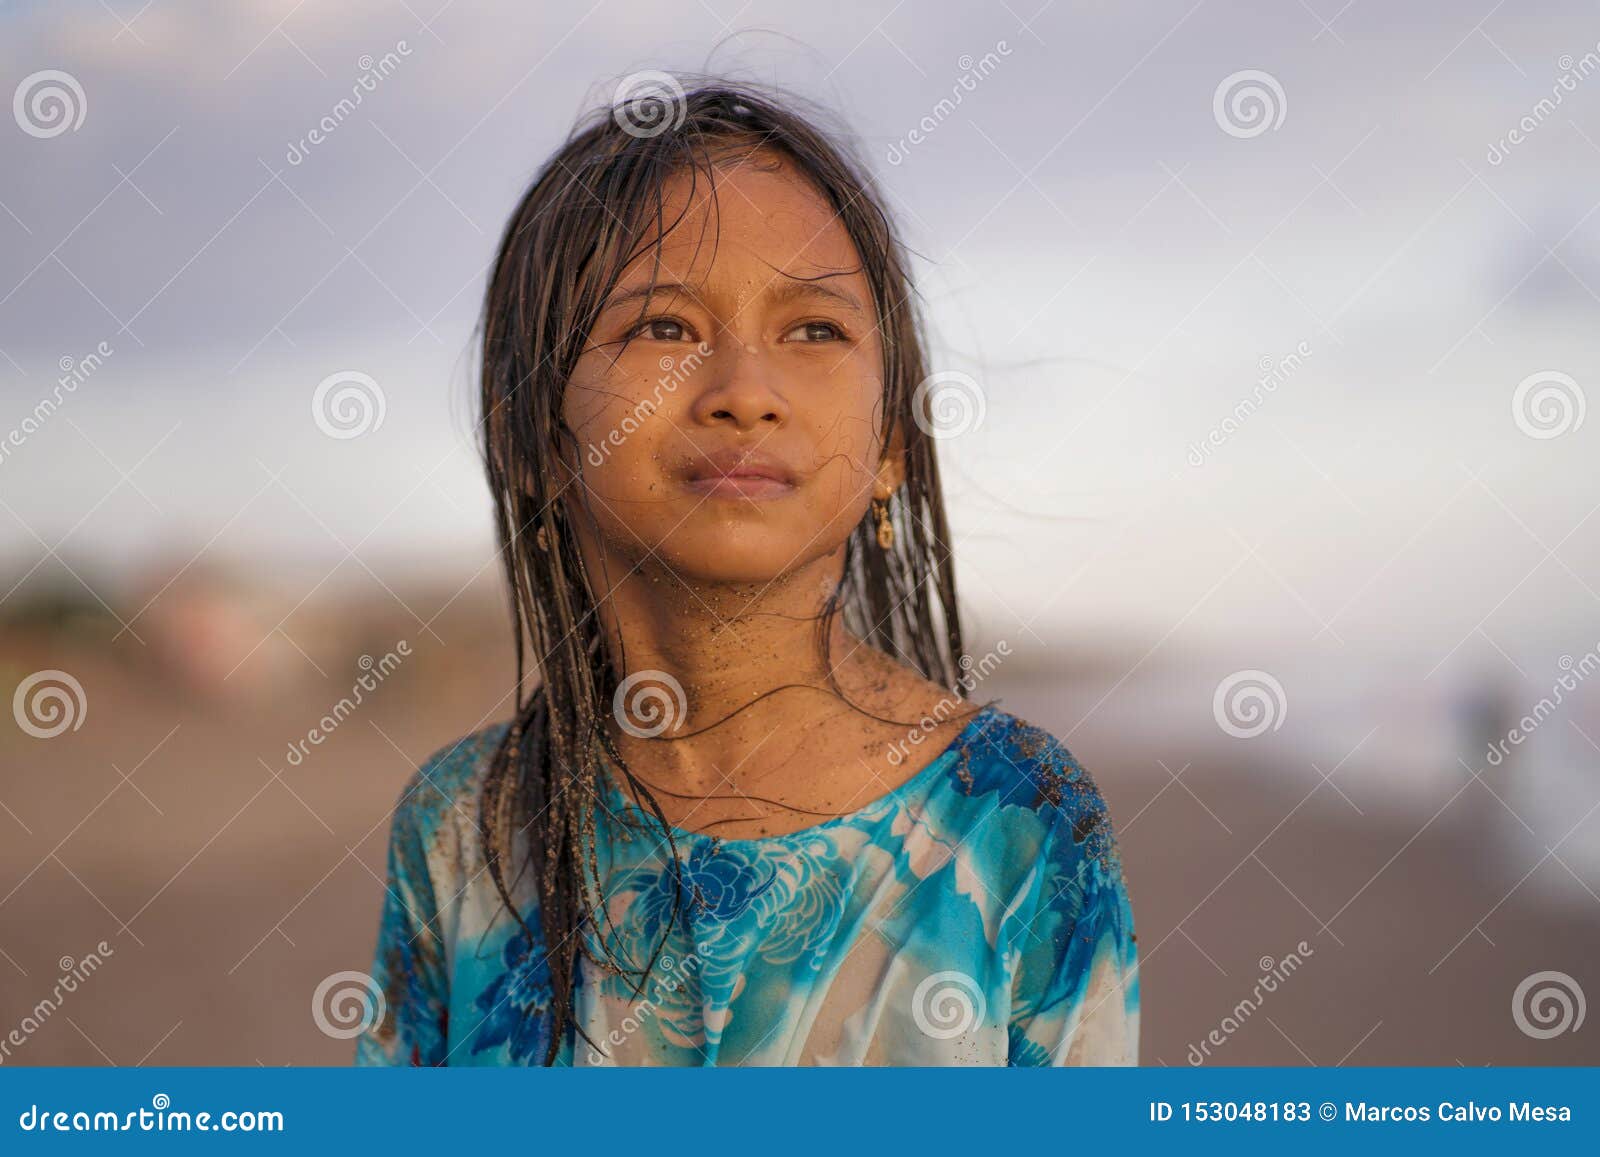 Young Beautiful and Happy 7 or 8 Years Old Asian American Mixed Child Girl  with Wet Hair Enjoying Holidays Playing in the Sea Stock Image - Image of  female, holidays: 153048183